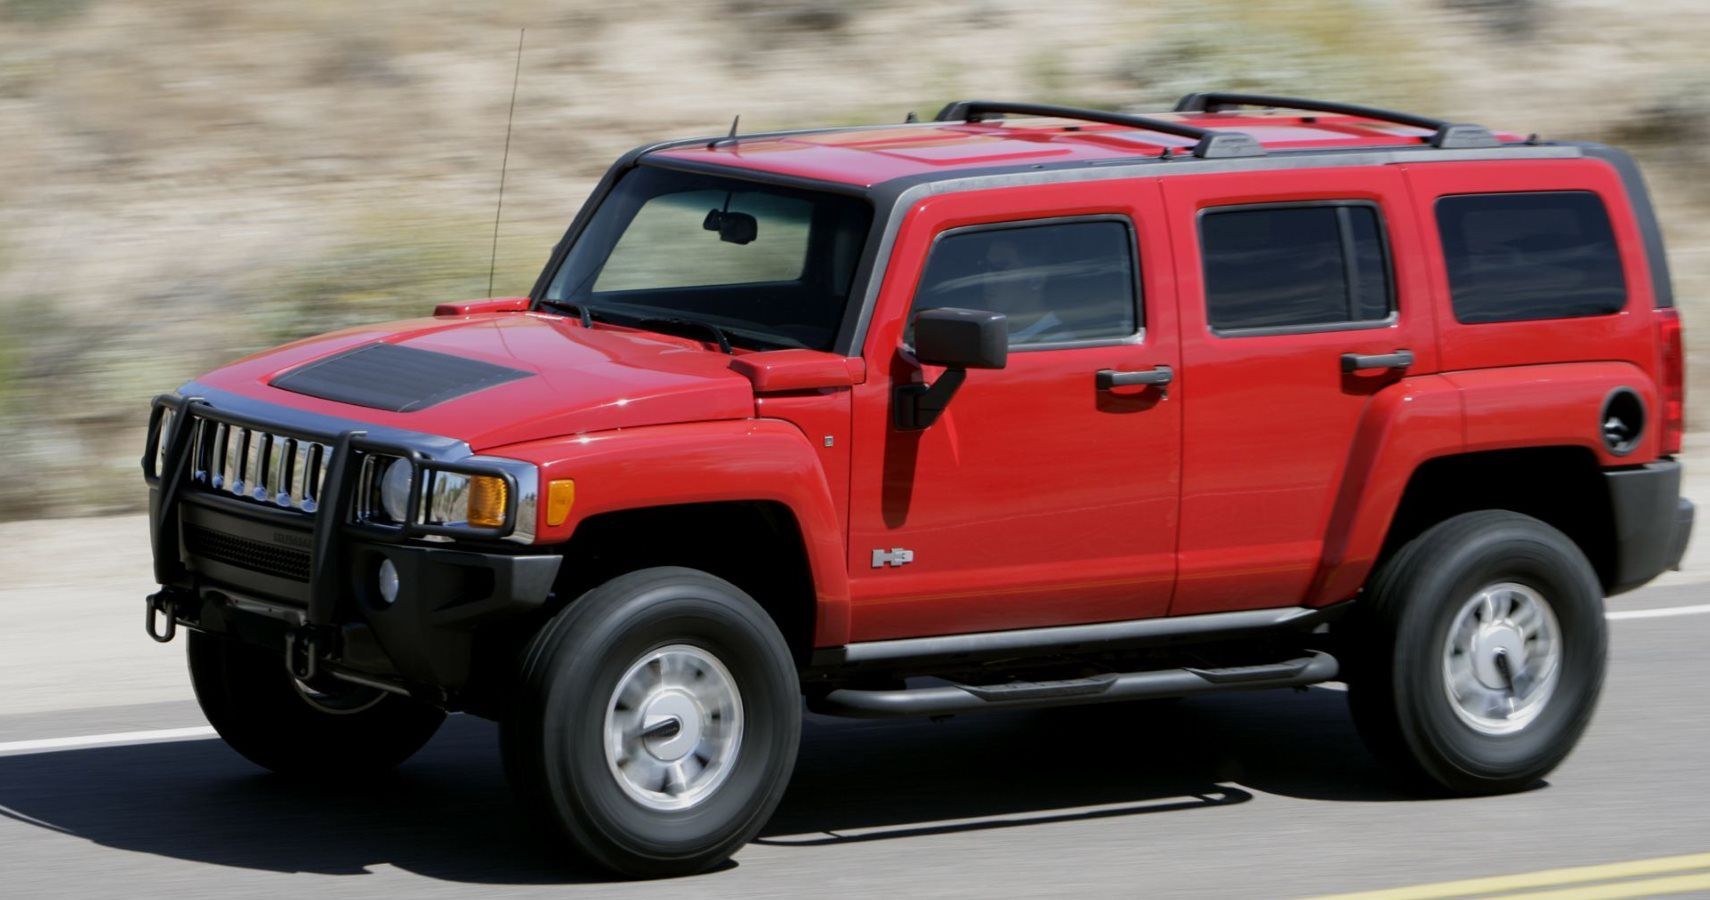 General Motors Toys With Our Emotions By Considering An Electric Hummer